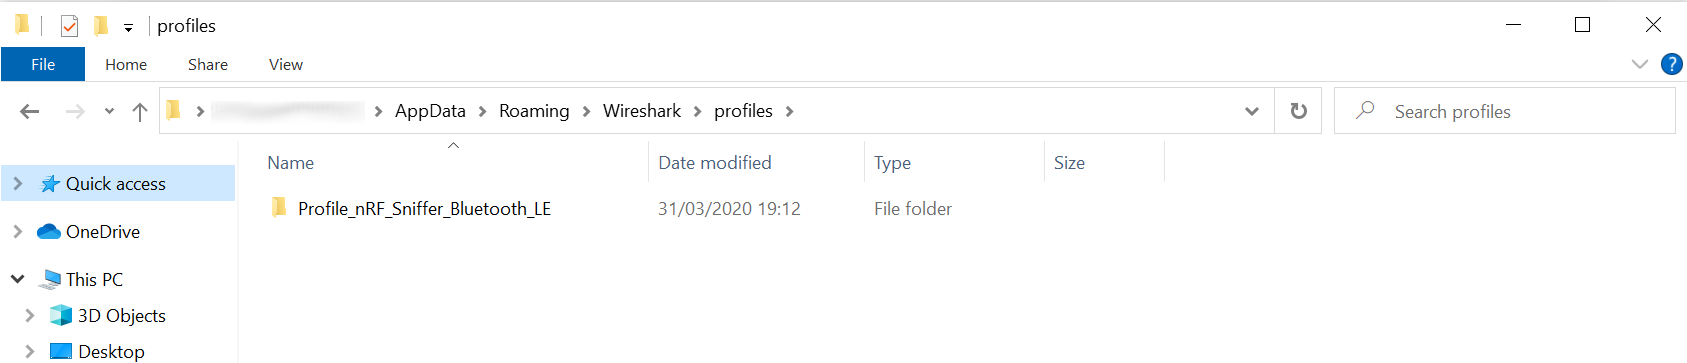 Screenshot that shows the contents of the profile folder